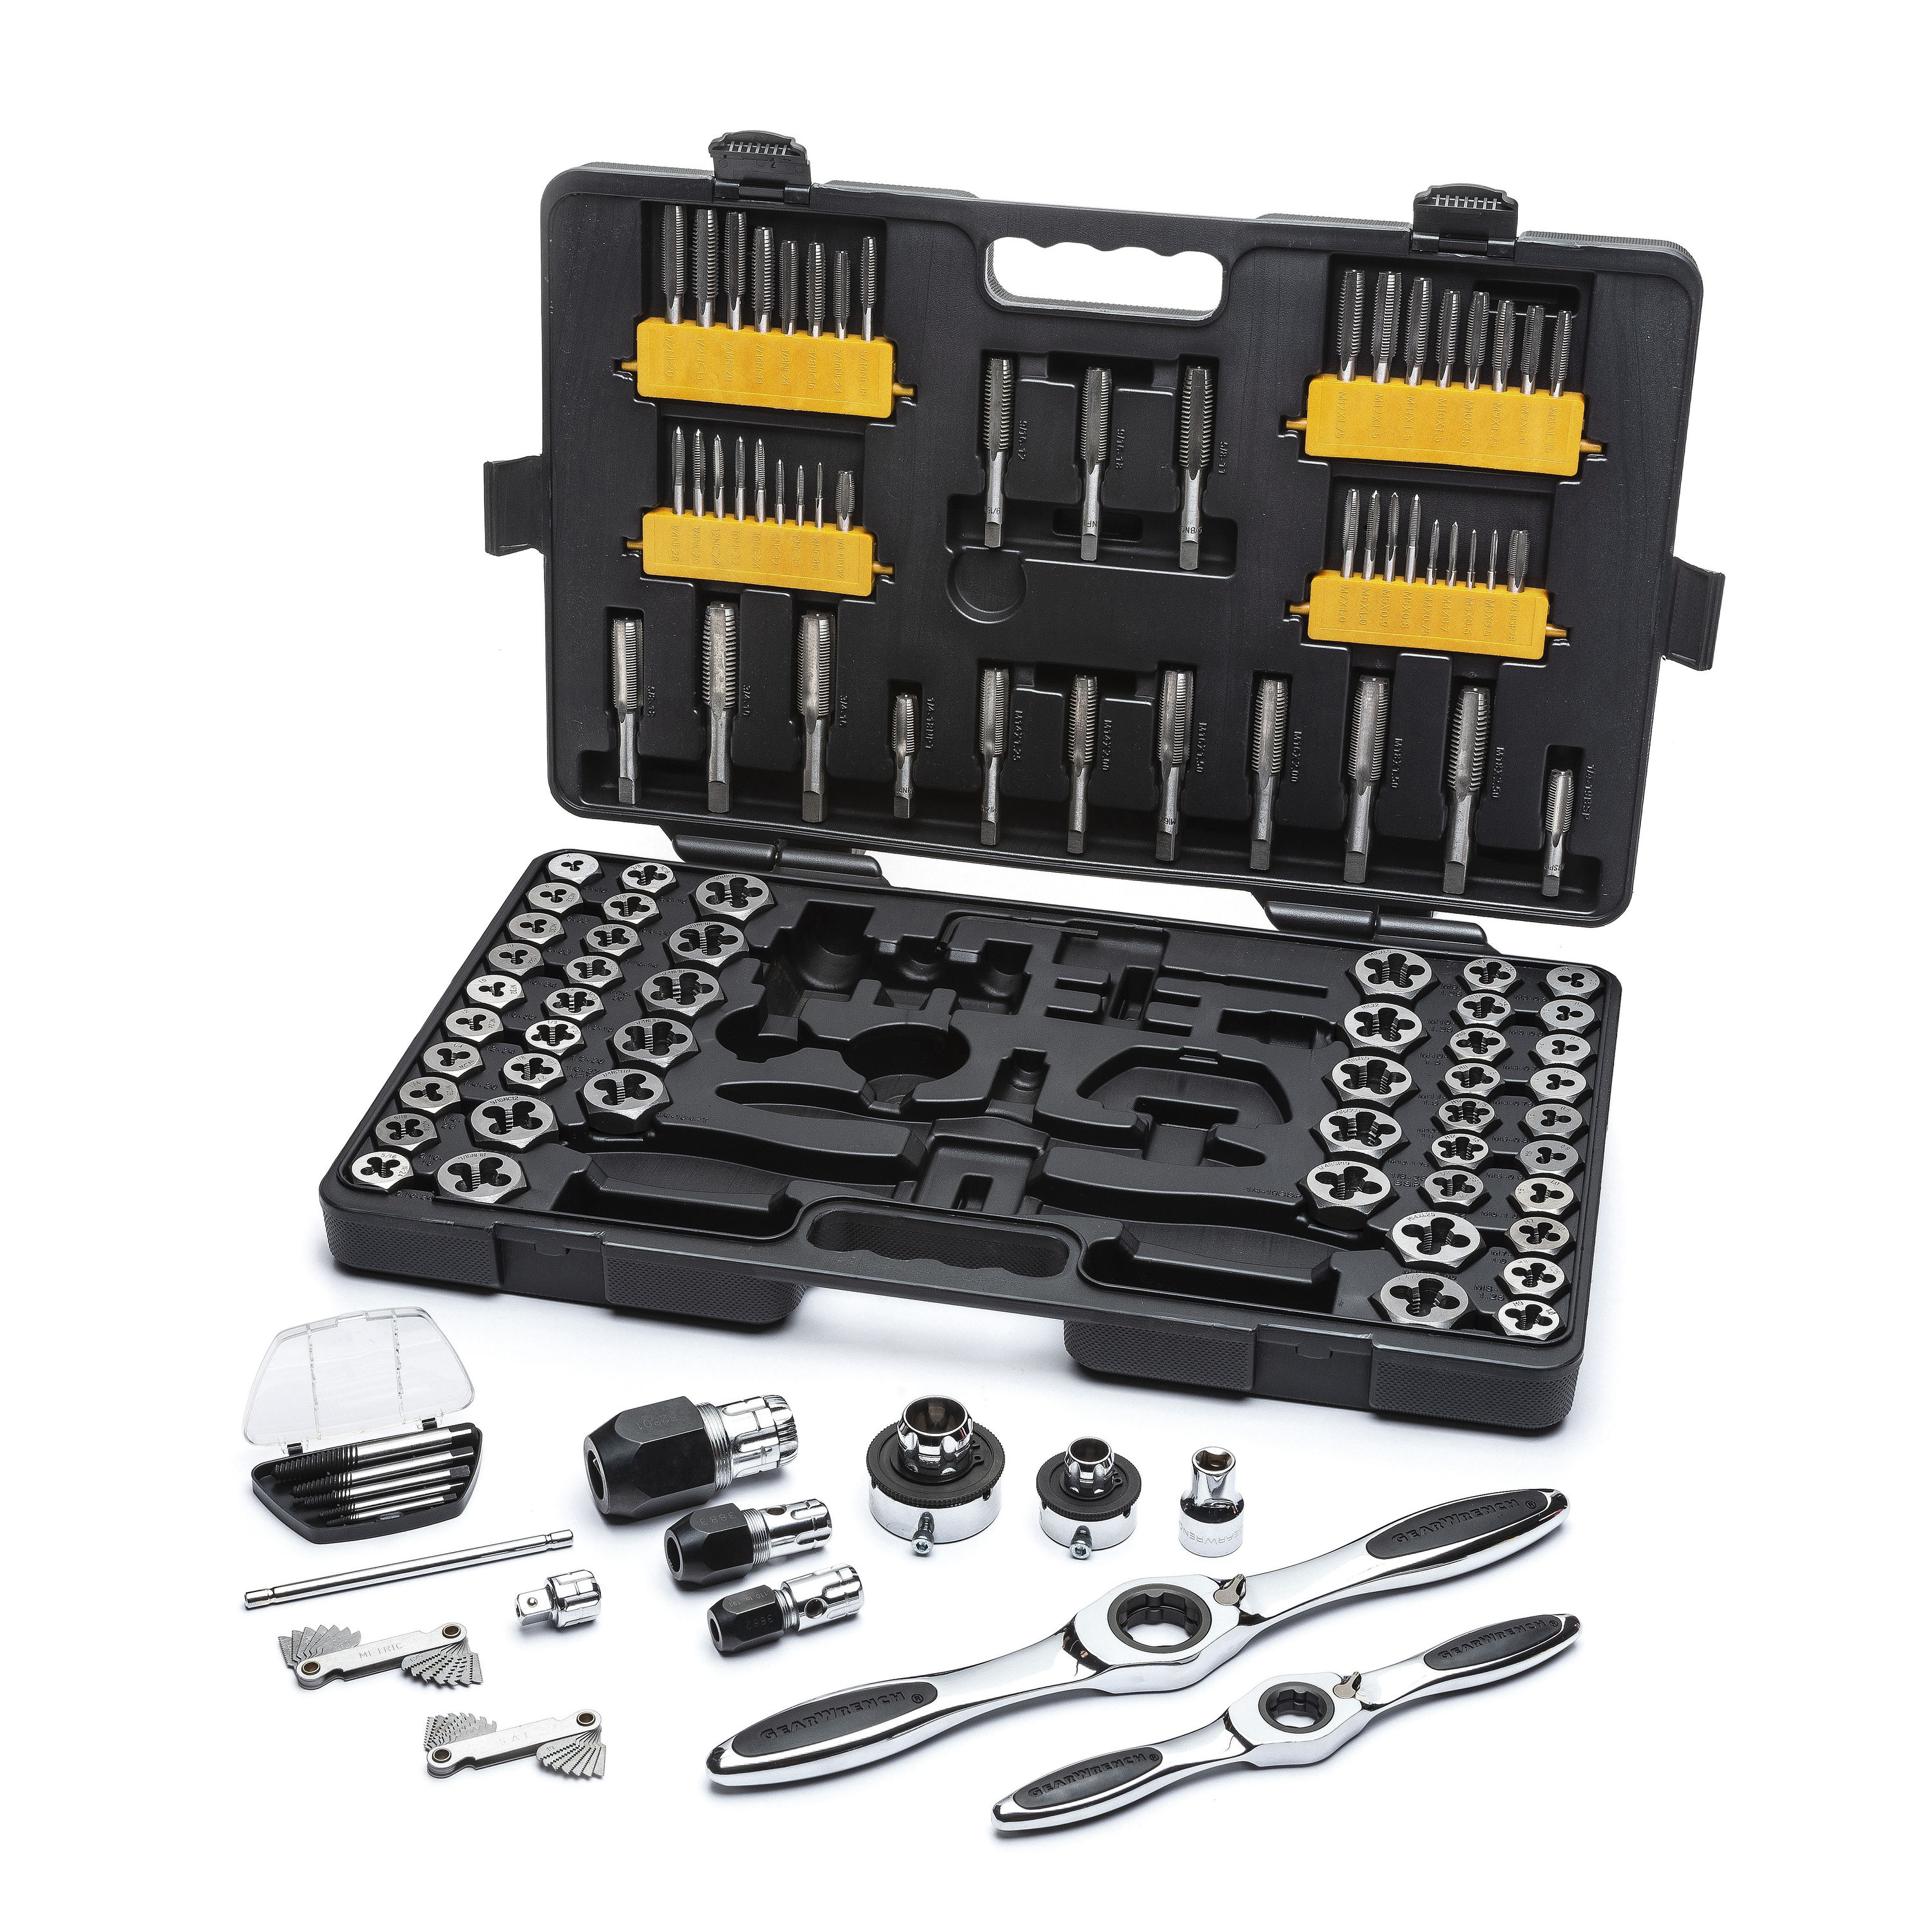 12pc SAE & Metric Tap and Die Set Screw Extractor Remover Hand Tool Kits w/ Case 